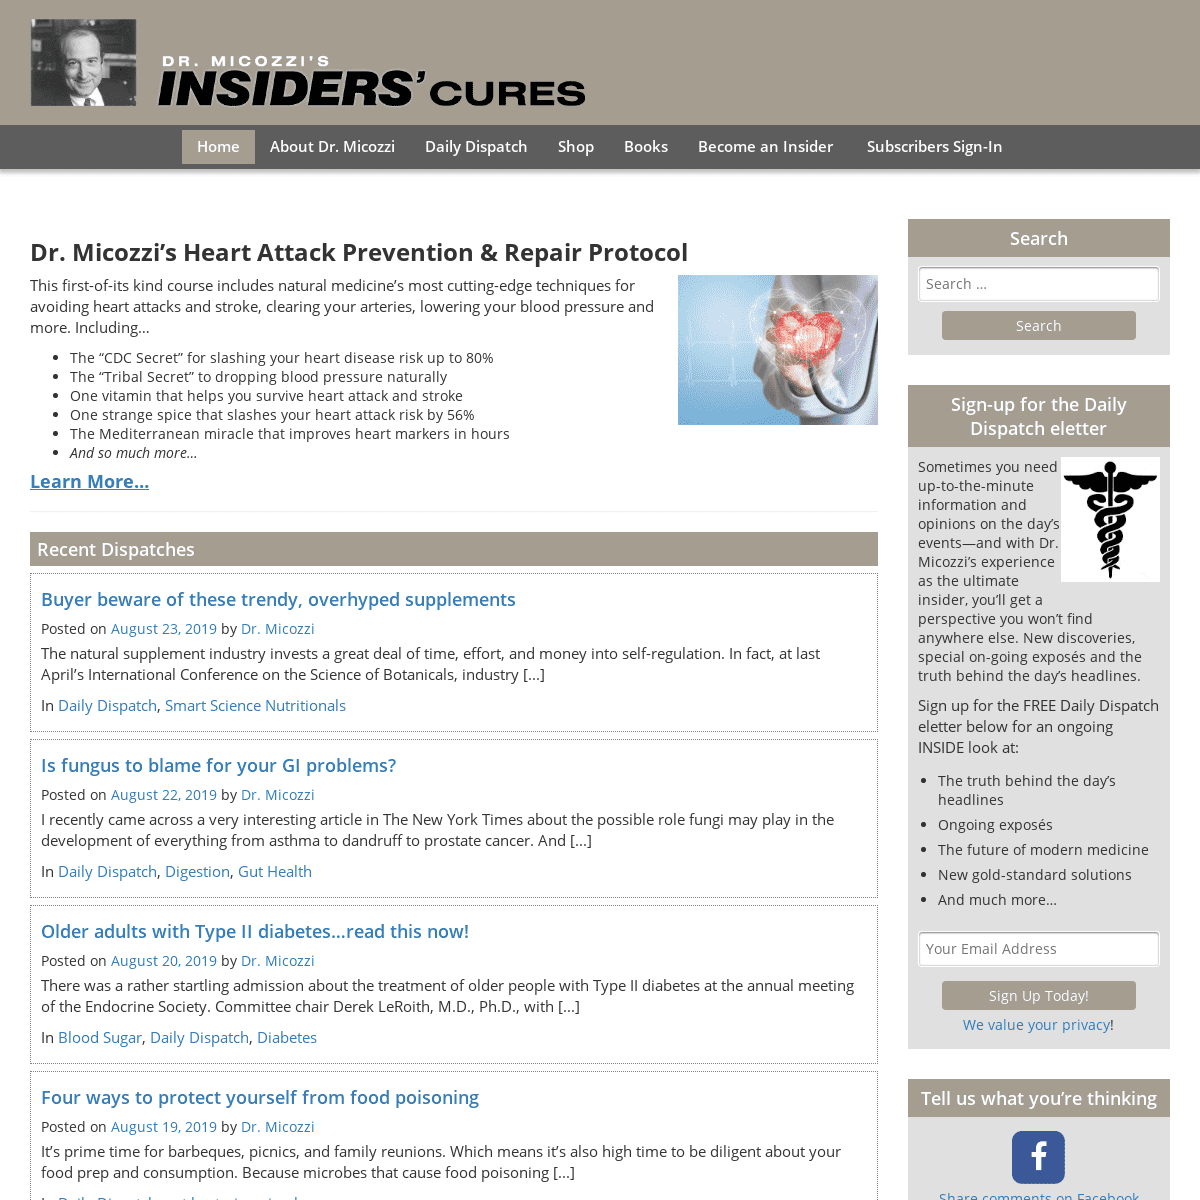 Dr. Micozzi's Insiders' Cures